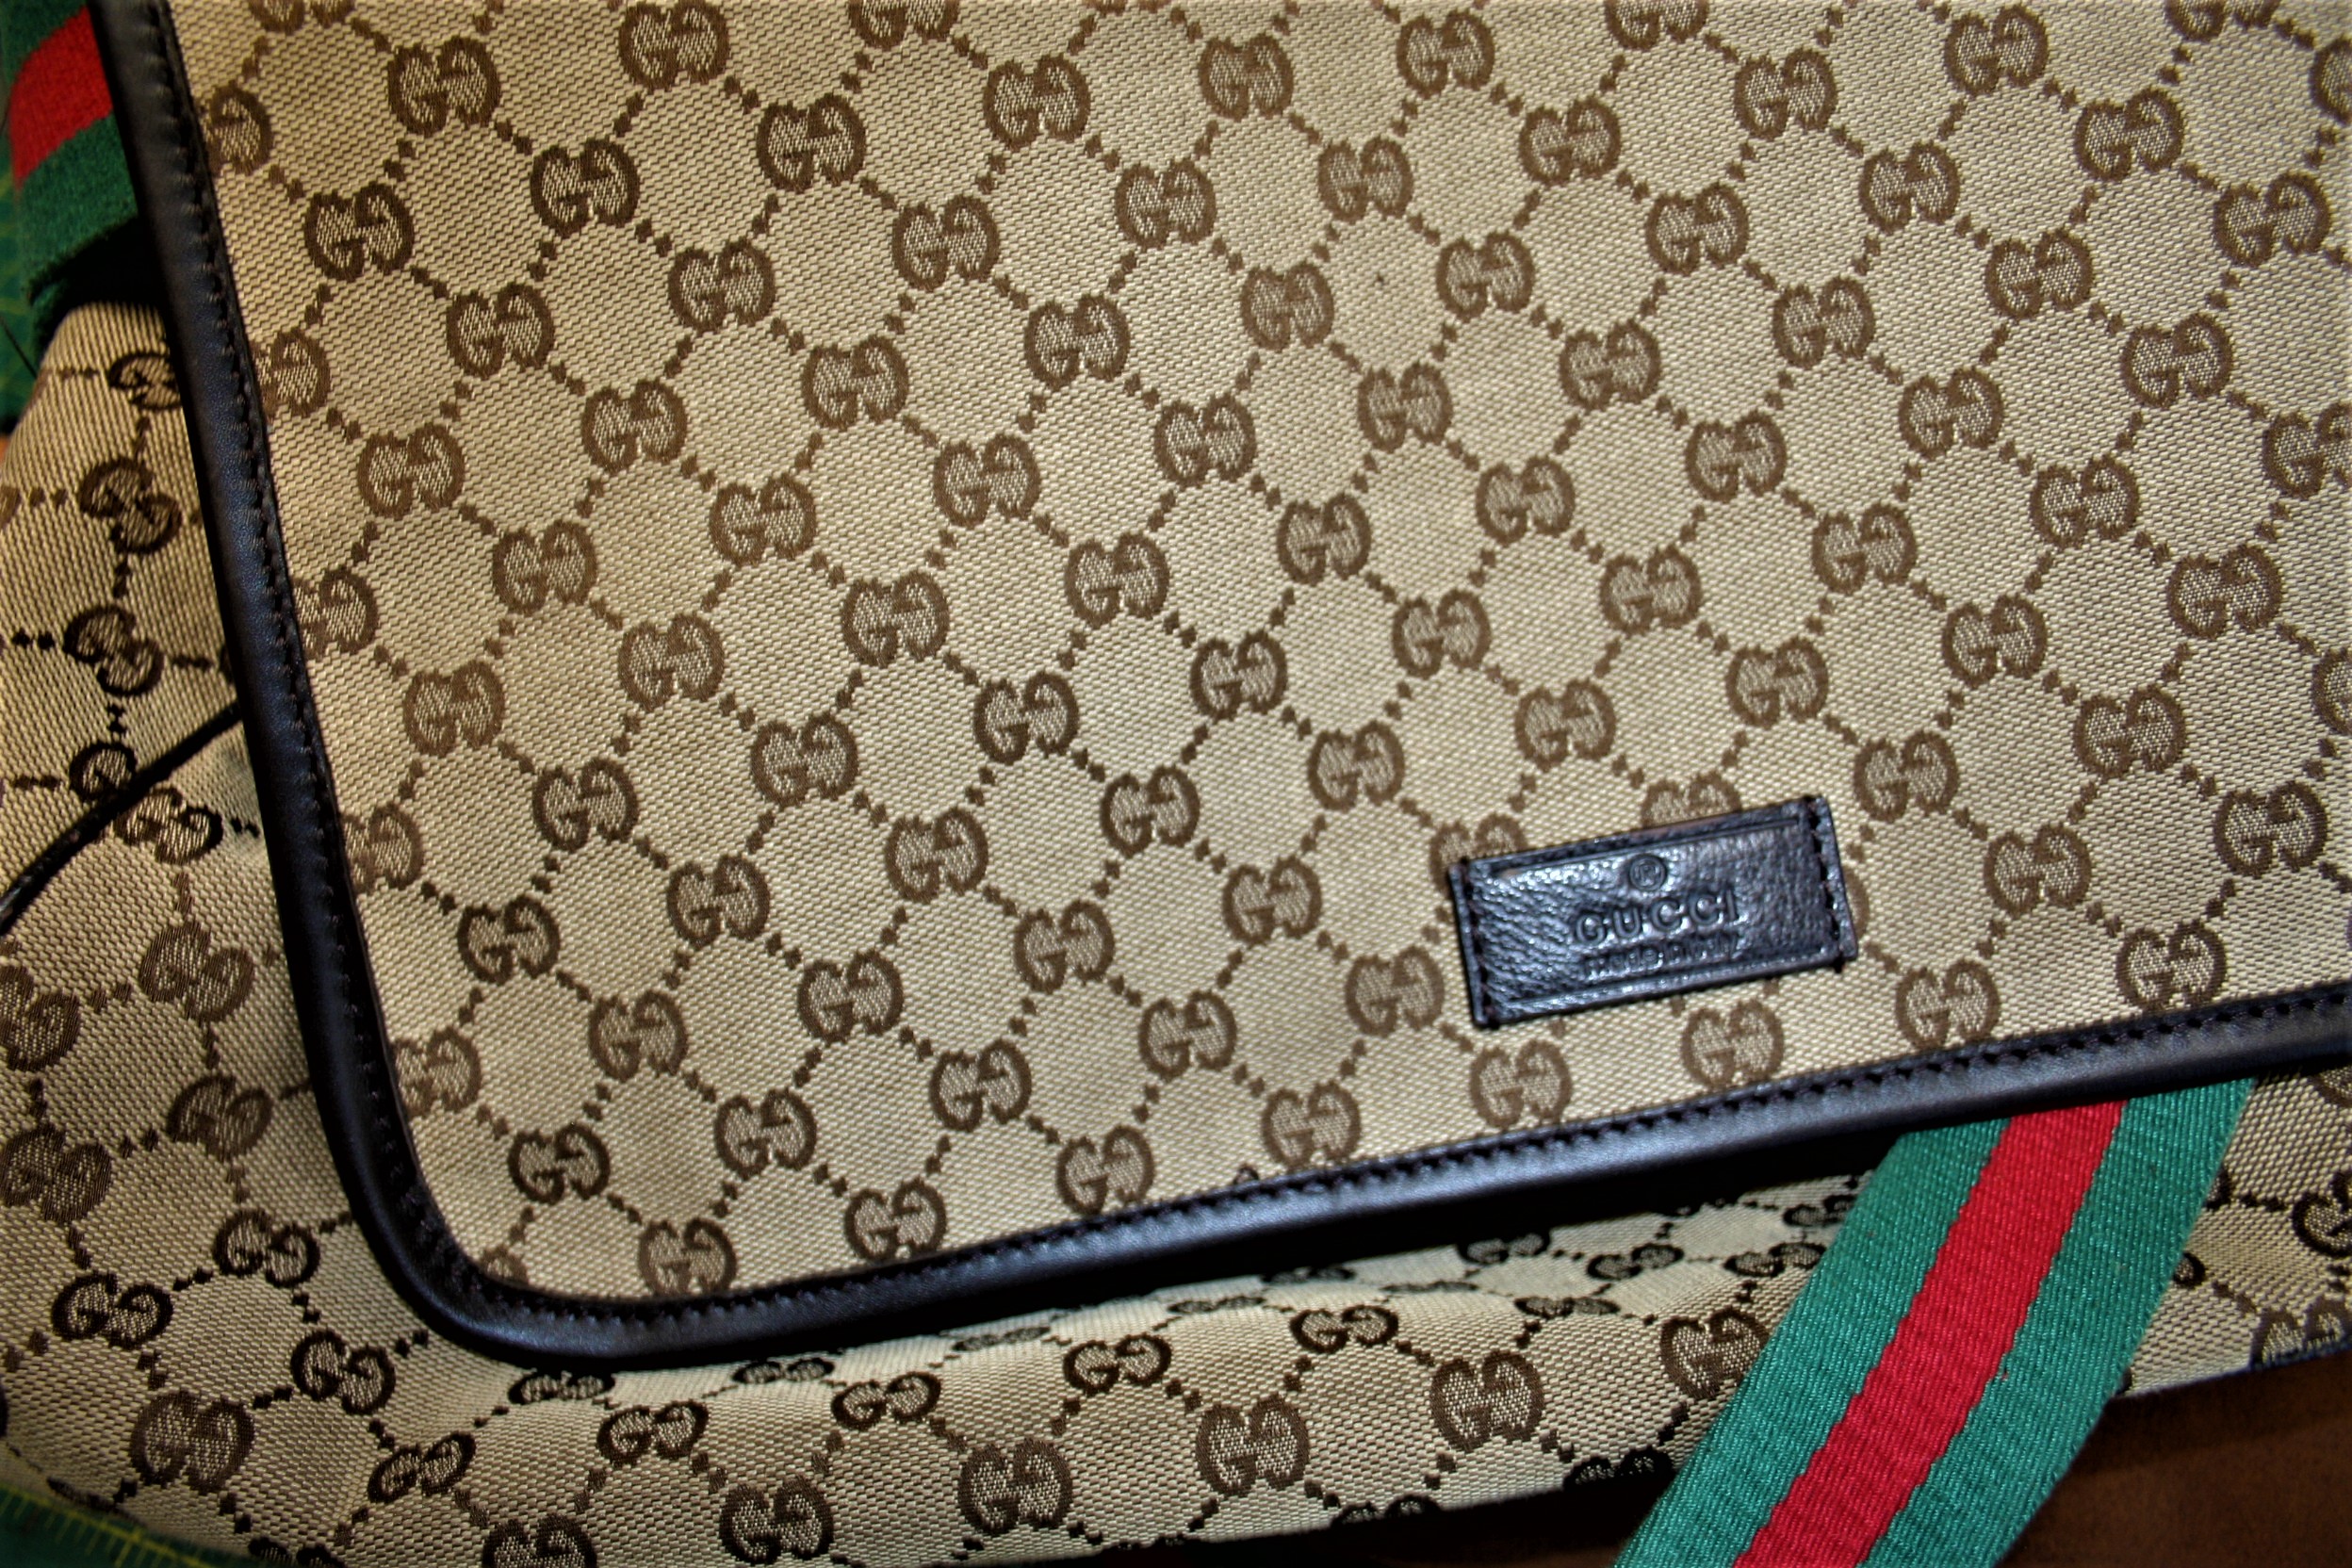 Gucci Shoulder bag with new leather binding